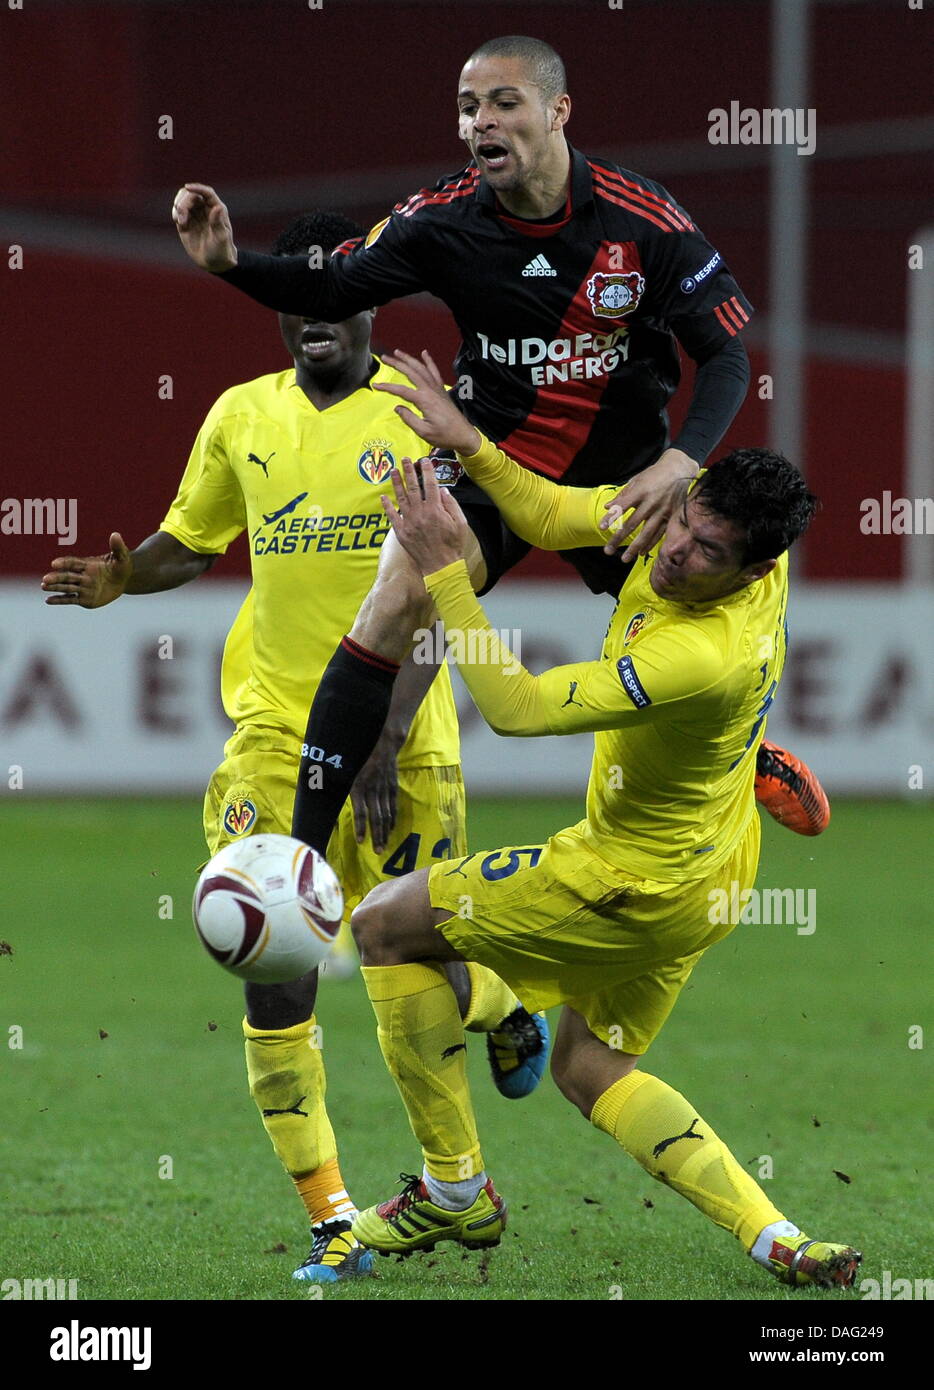 The picture shows Leverkusen's Sidney Sam (M) and Jose Catala (R) and Wakaso Mubarak (L) of Villarreal fighting for the ball during the Europa League round of 16 first leg soccer match between Bayer Leverkusen and Villarreal C.F. at the BayArena in Leverkusen, Germany on 10 March 2011. Photo: Federico Gambarini Stock Photo